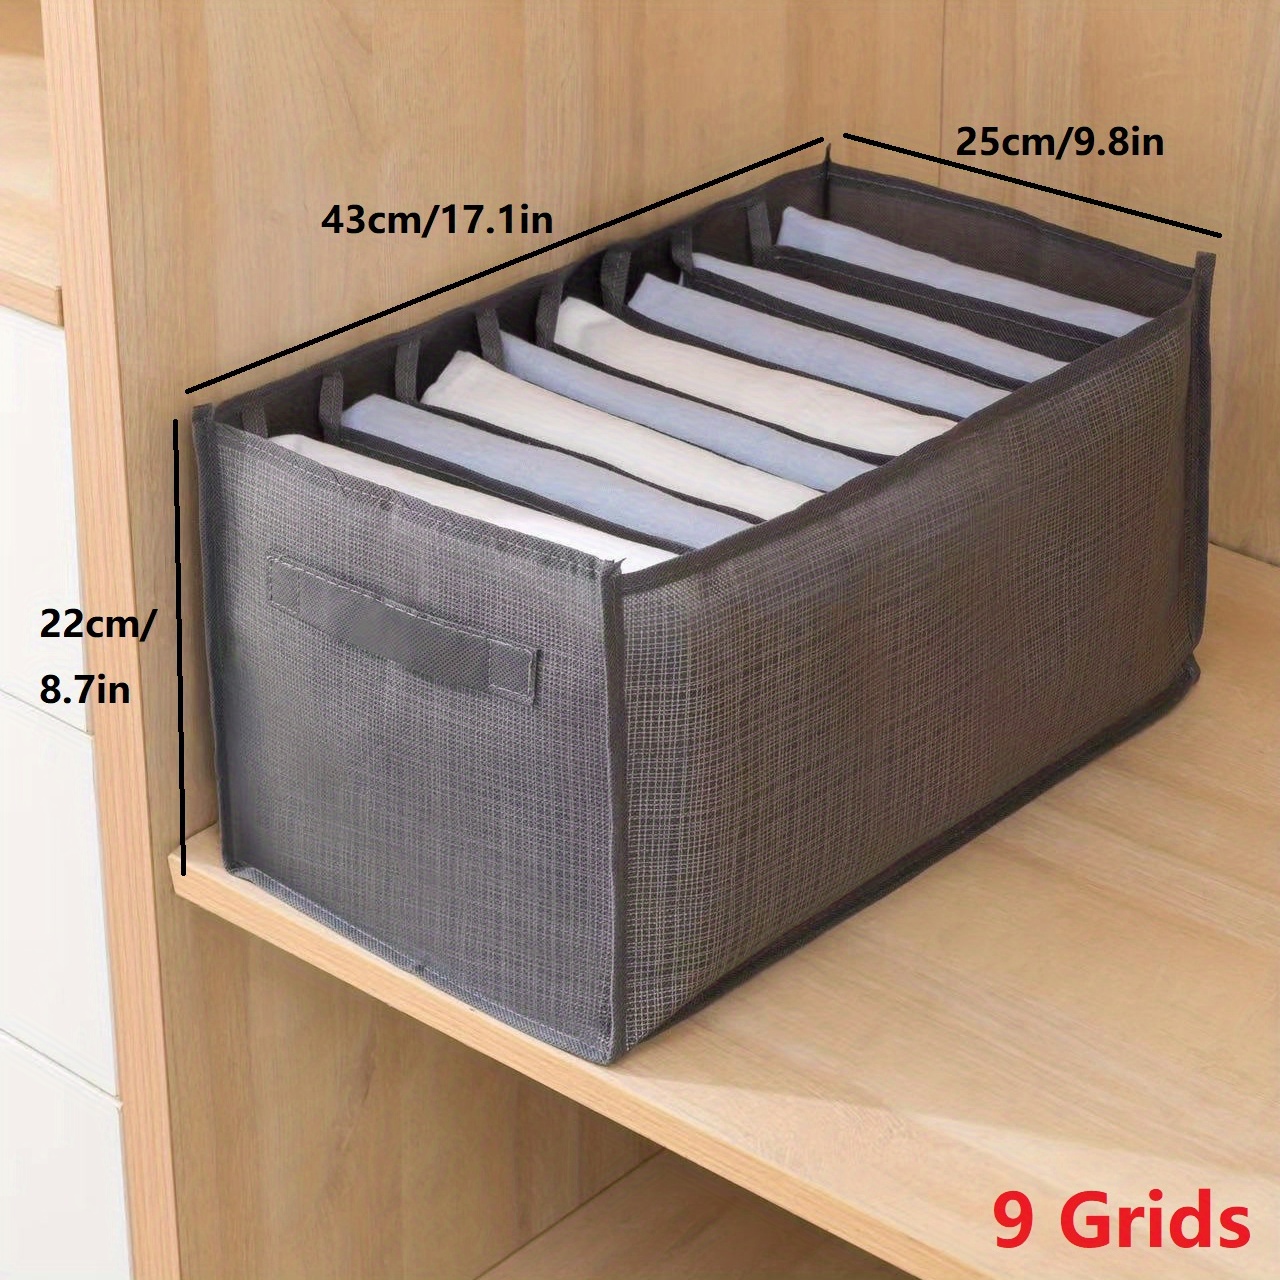 Plastic Storage Boxes For Underwear, Injinji Socks, And Pants Wardrobe  Cabinet, Dressing Room, Closet Organizer With Drawer 230625 From Ren10,  $25.58